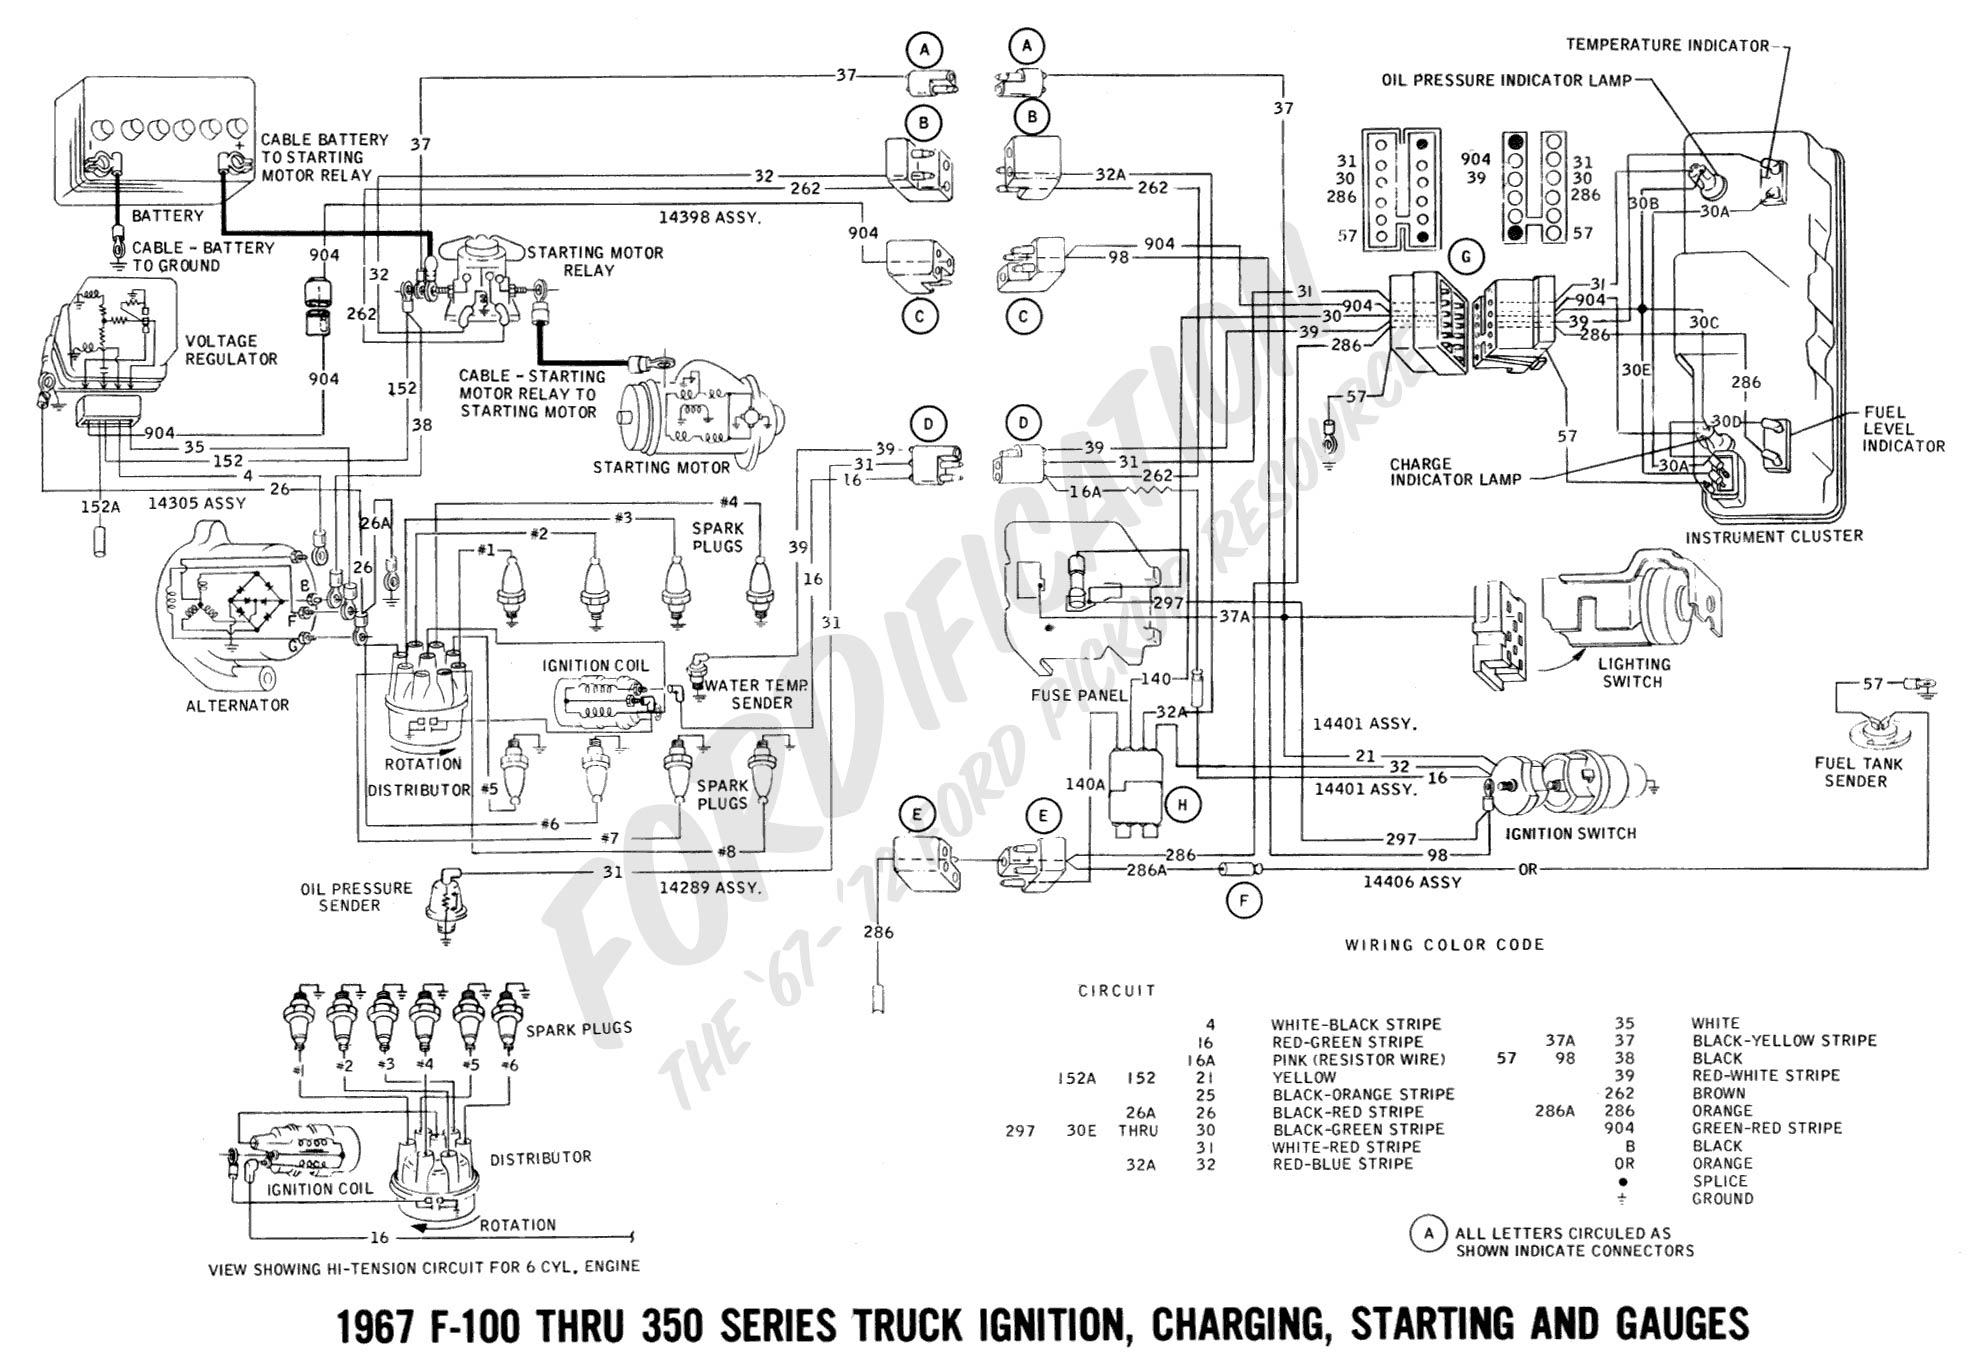 Ford 390 Starter Solenoid Wiring Diagram from www.fordification.com